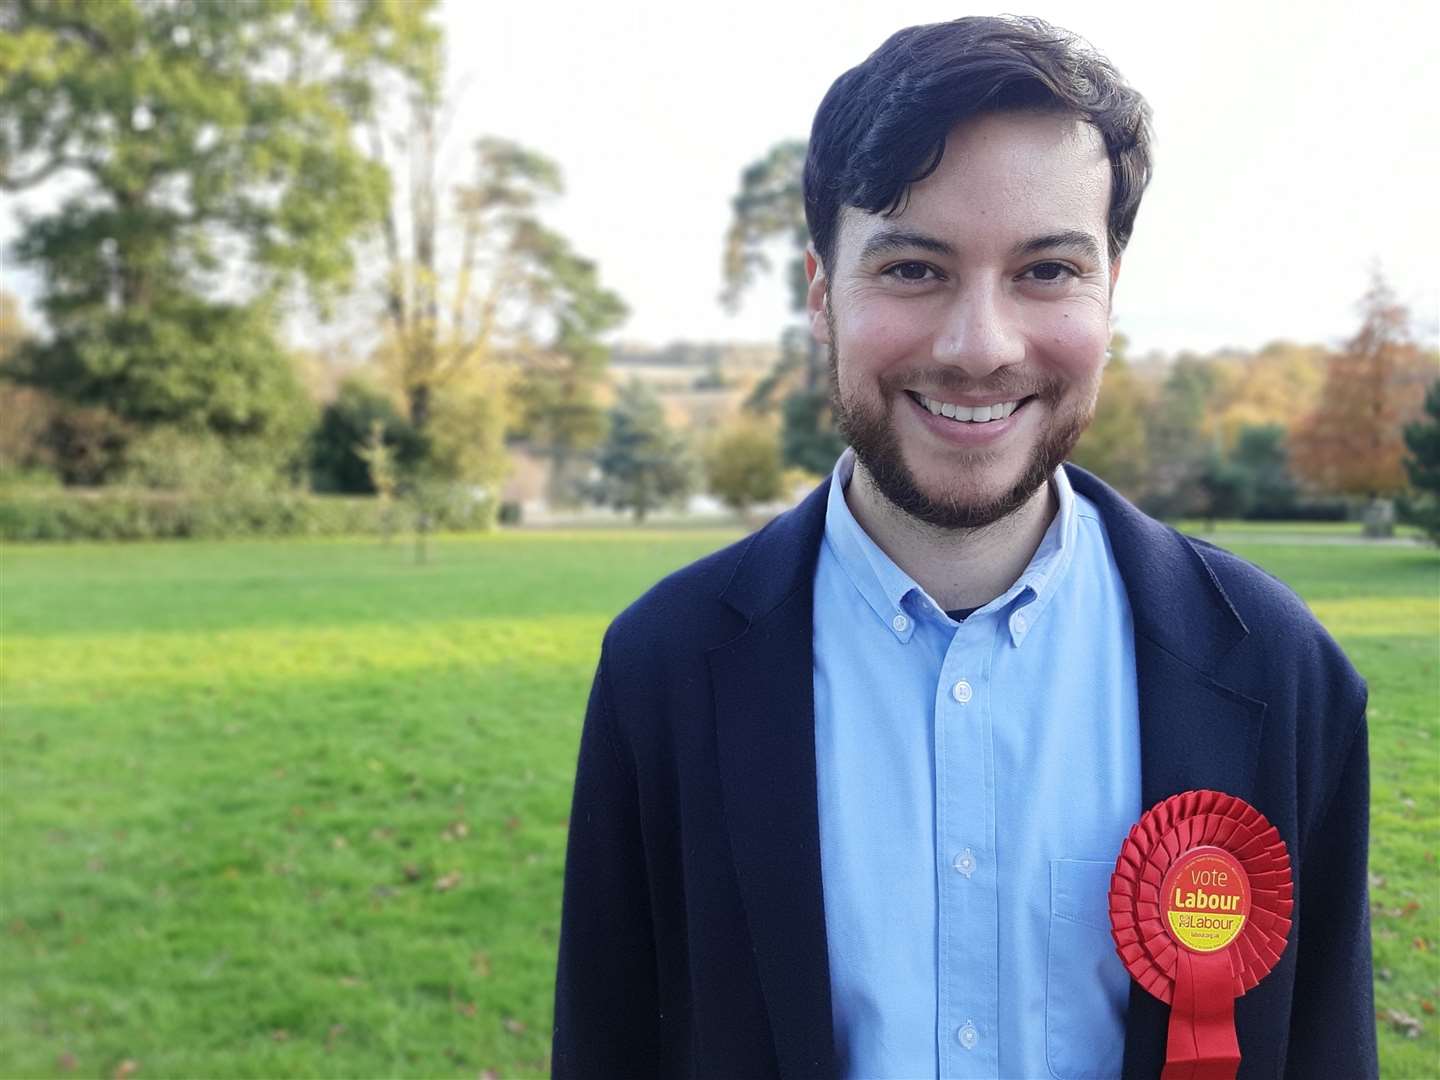 Labour have selected Antonio Weiss to run in Tunbridge Wells for the General Election (21621445)